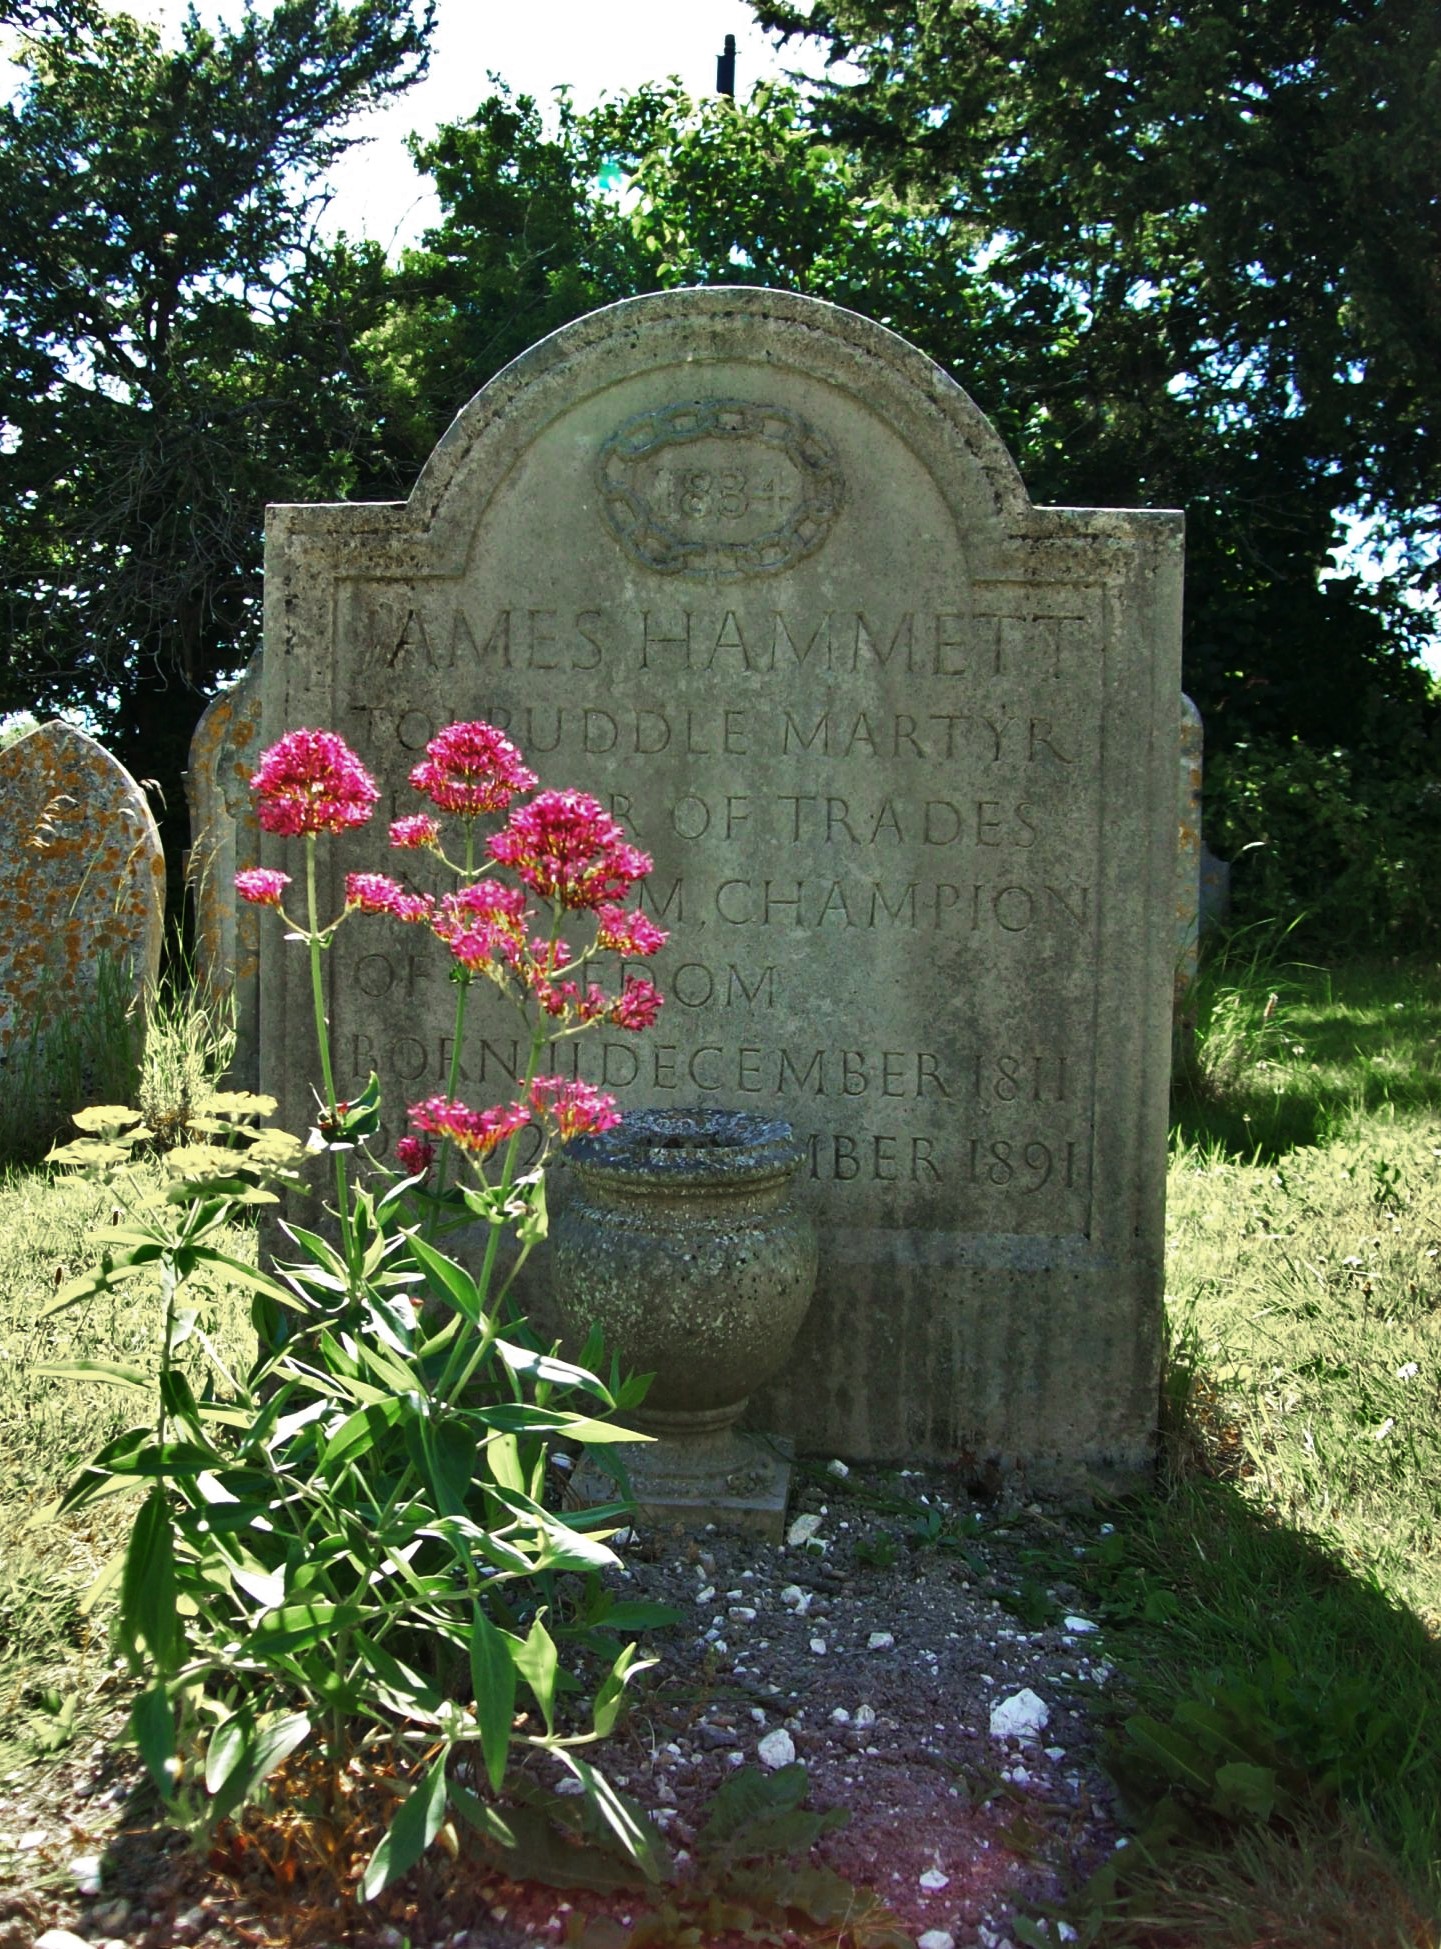 The grave of James Hammett, who was the only martyr to return and live in the village of Tolpuddle.